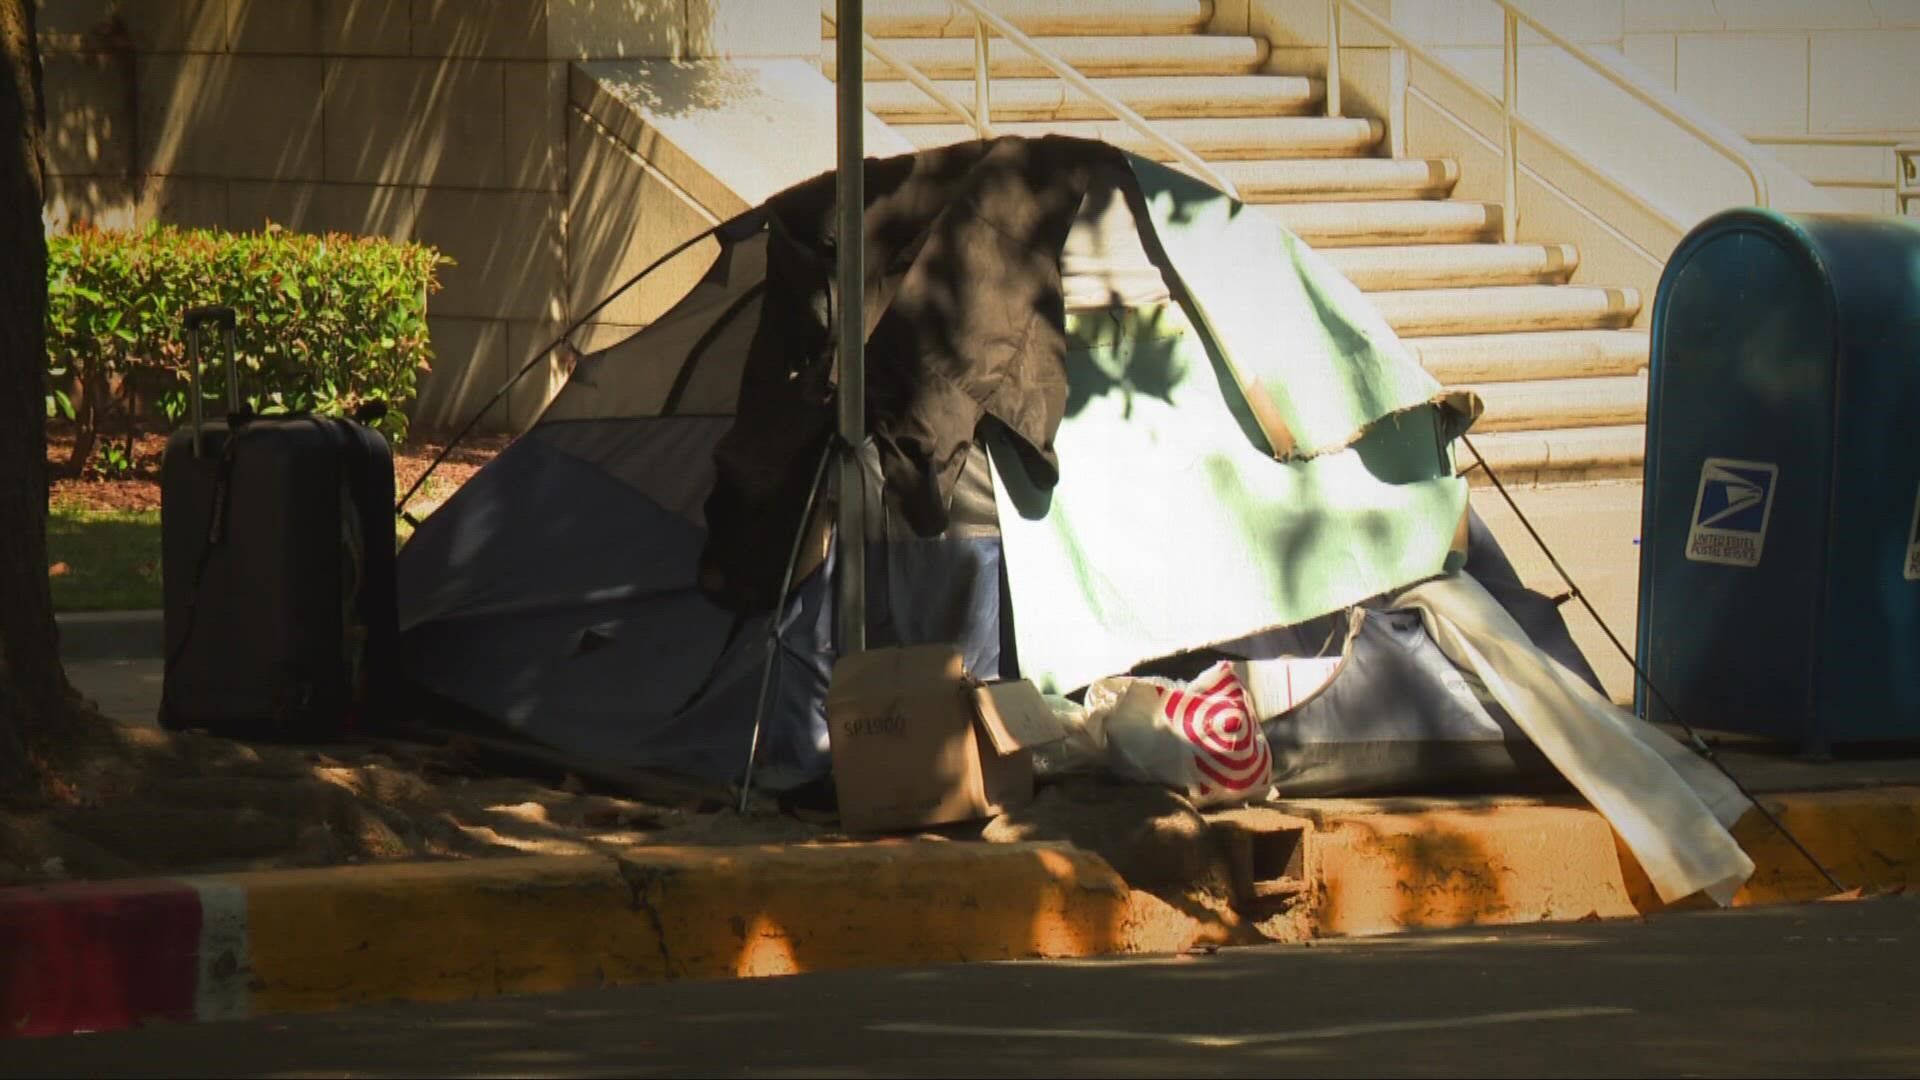 Organizations spoke out about how Measure O would demolish homeless encampments and either relocate the unhoused or criminalize and remove them if approved.